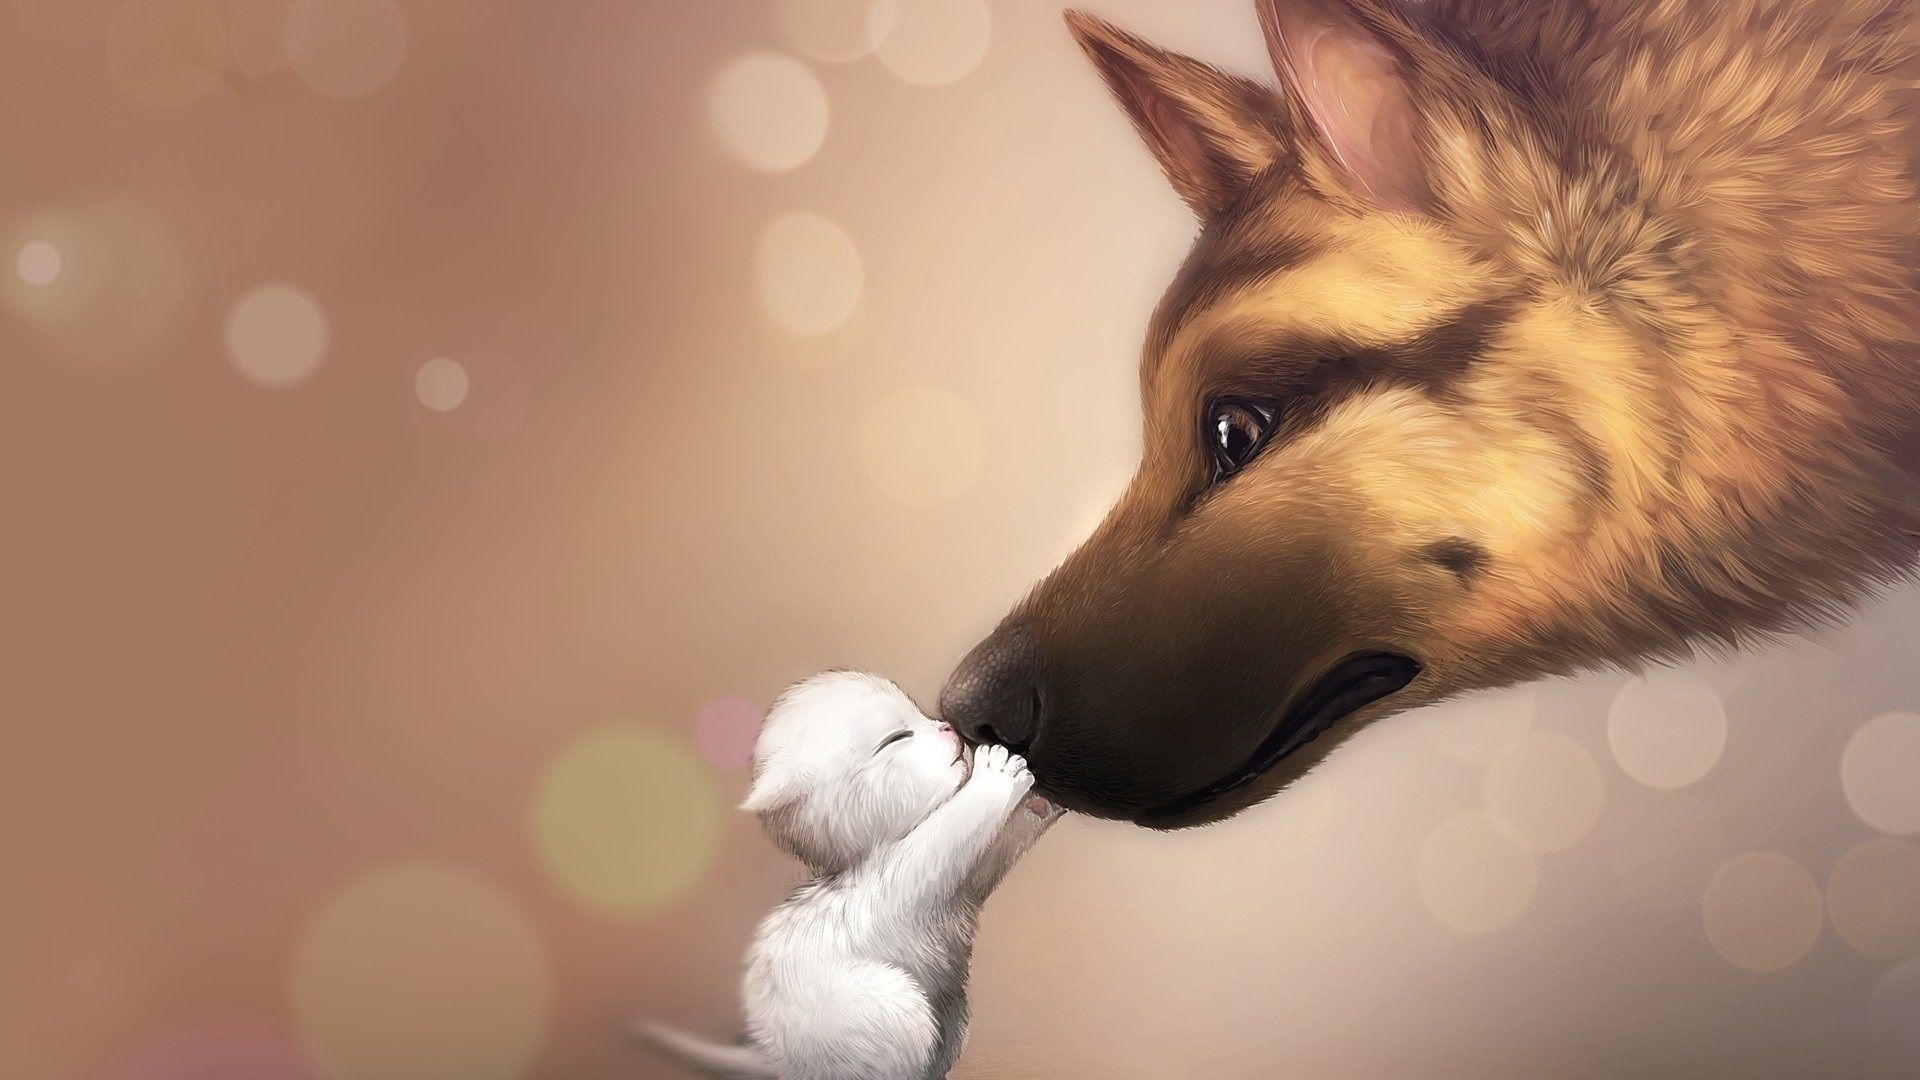 Free download Cute Anime Dog Wallpaper anime Tiere [1920x1080] for your Desktop, Mobile & Tablet. Explore Cute Anime Dogs Wallpaper. Cute Anime Dogs Wallpaper, Cute Dogs Wallpaper, Cute Dogs Wallpaper